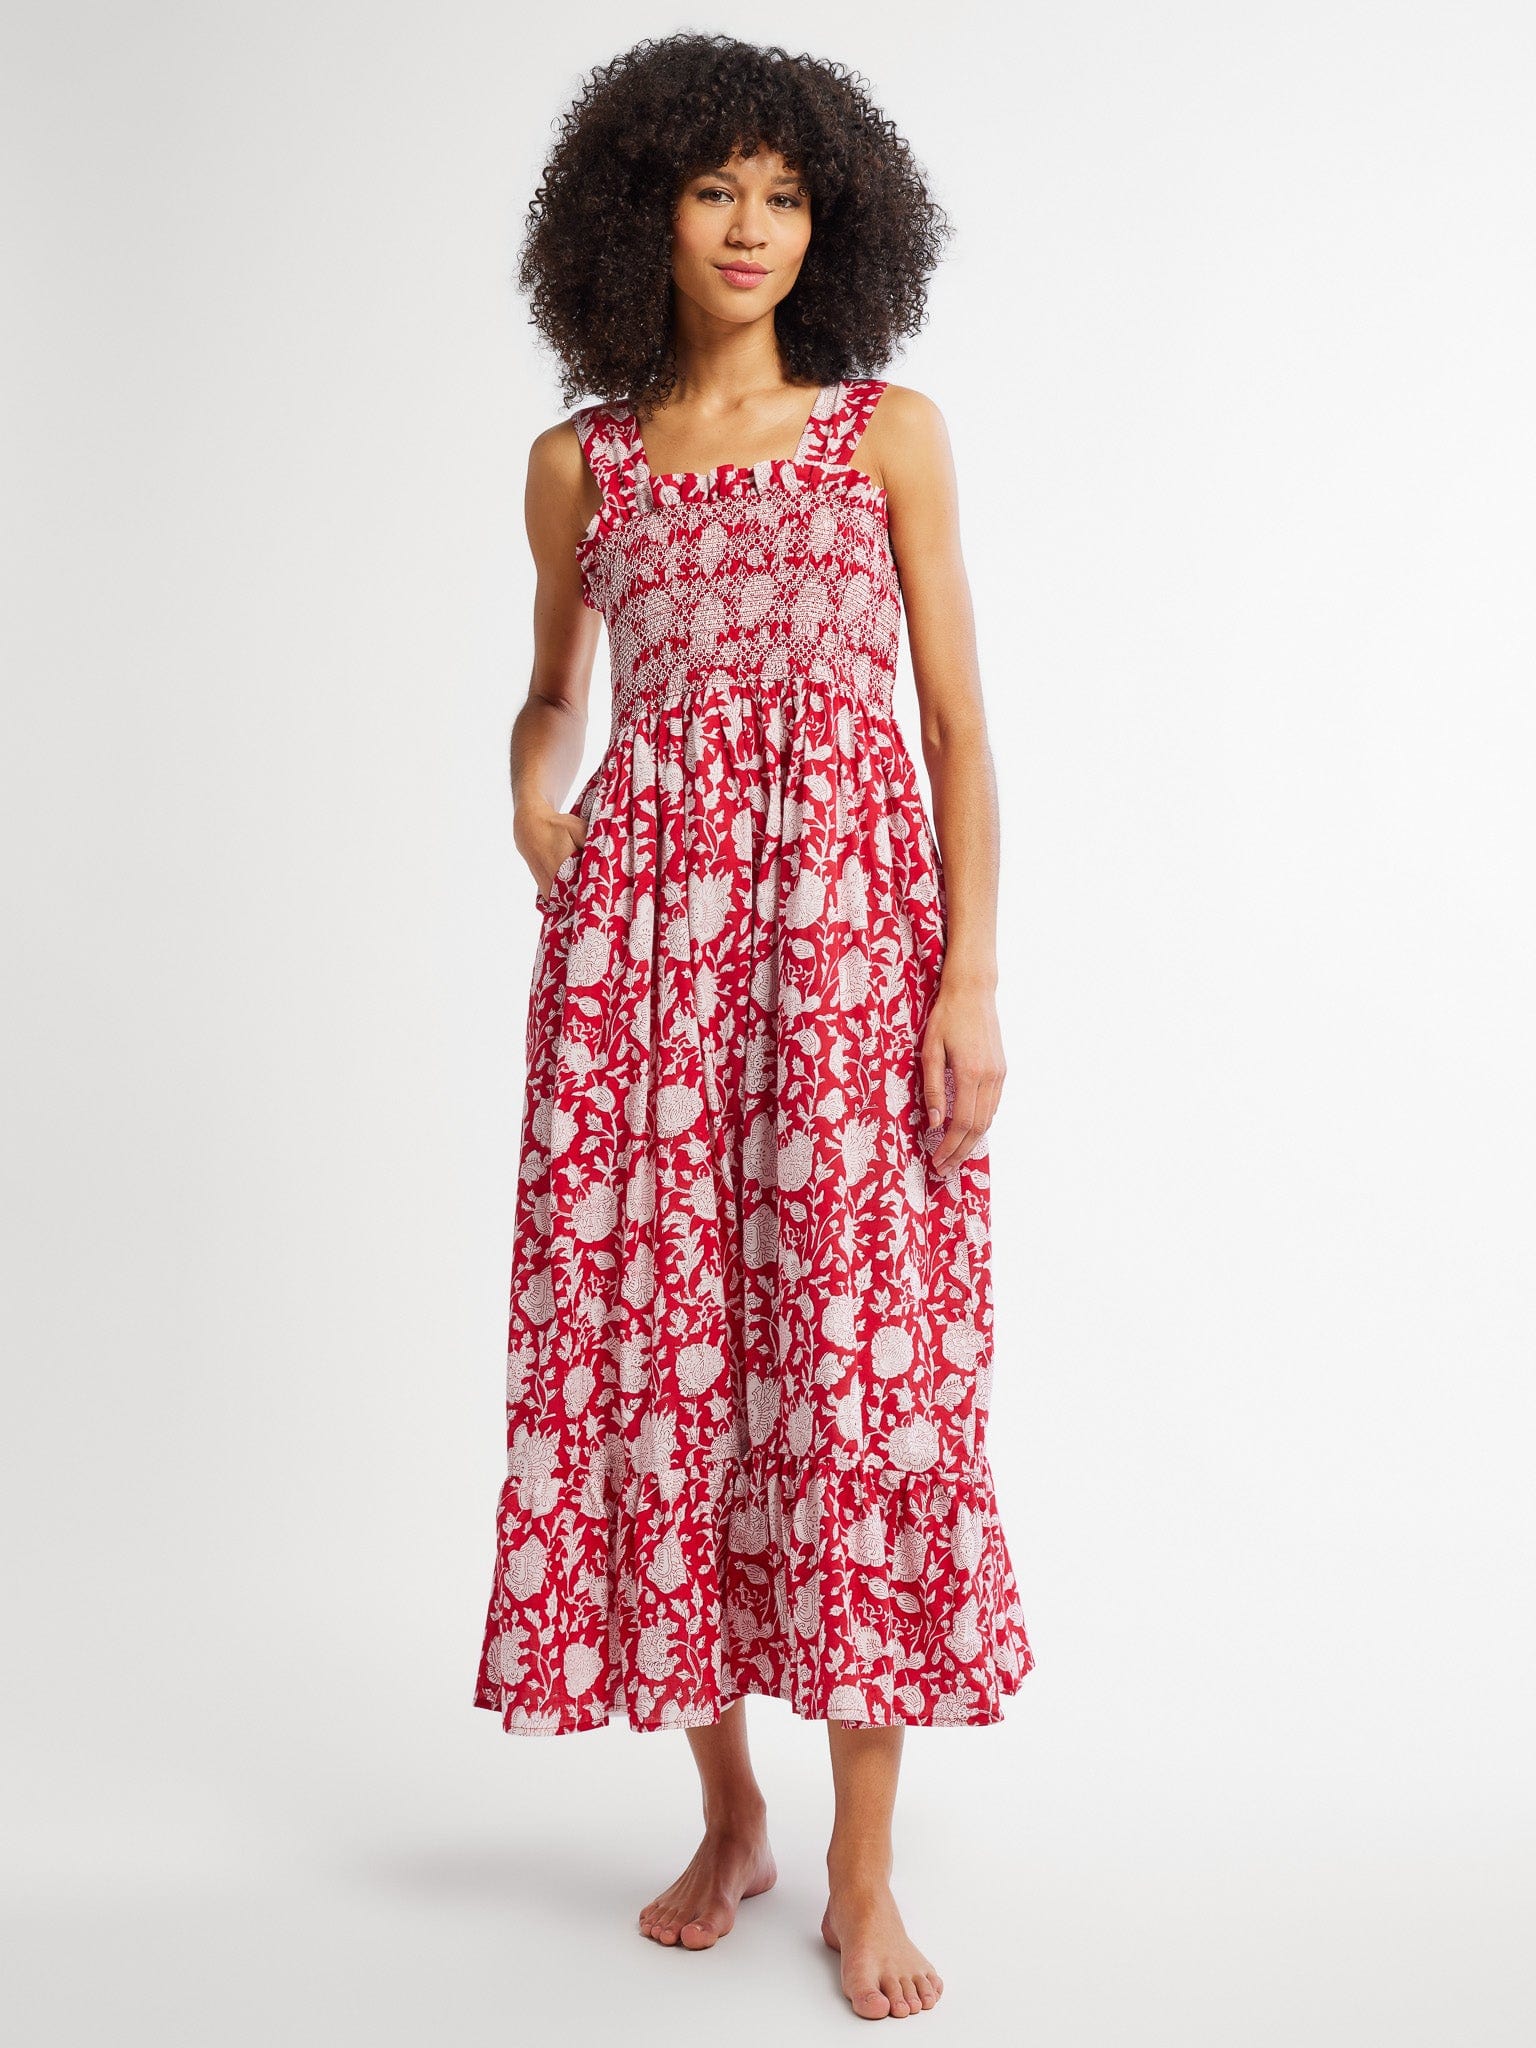 MILLE Clothing Garden Dress in Red Zinnia